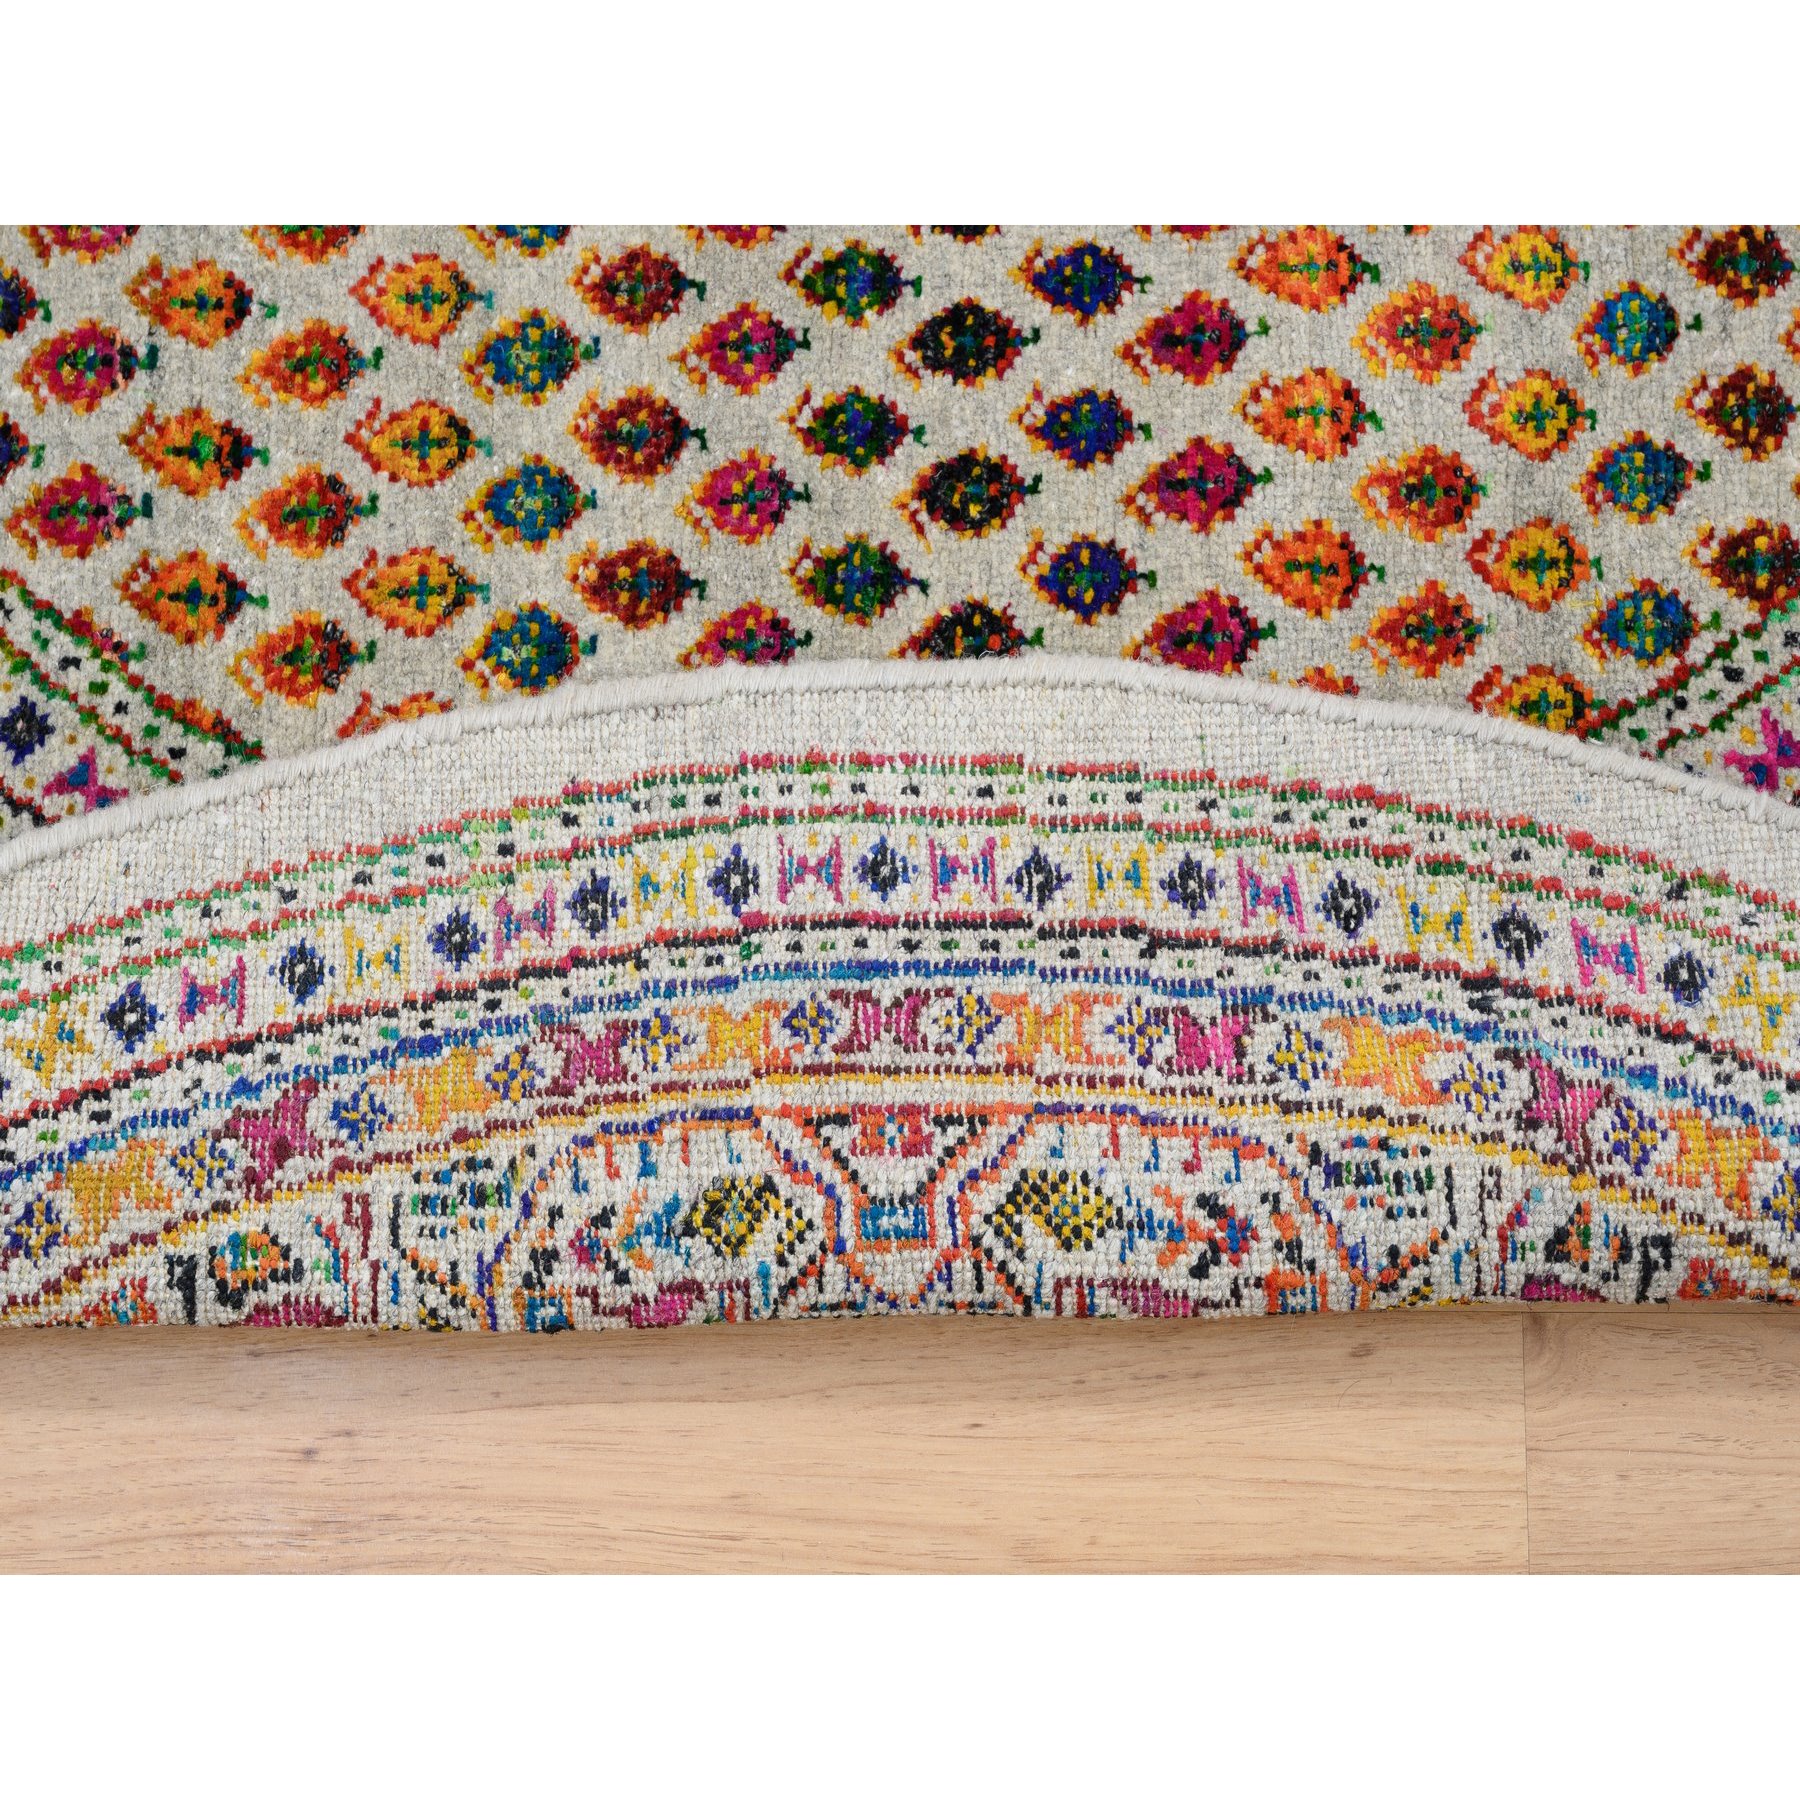 5'x5' Beige Sarouk Mir Inspired With Repetitive Boteh Design Colorful Wool And Sari Silk Hand Woven Oriental Round Rug 